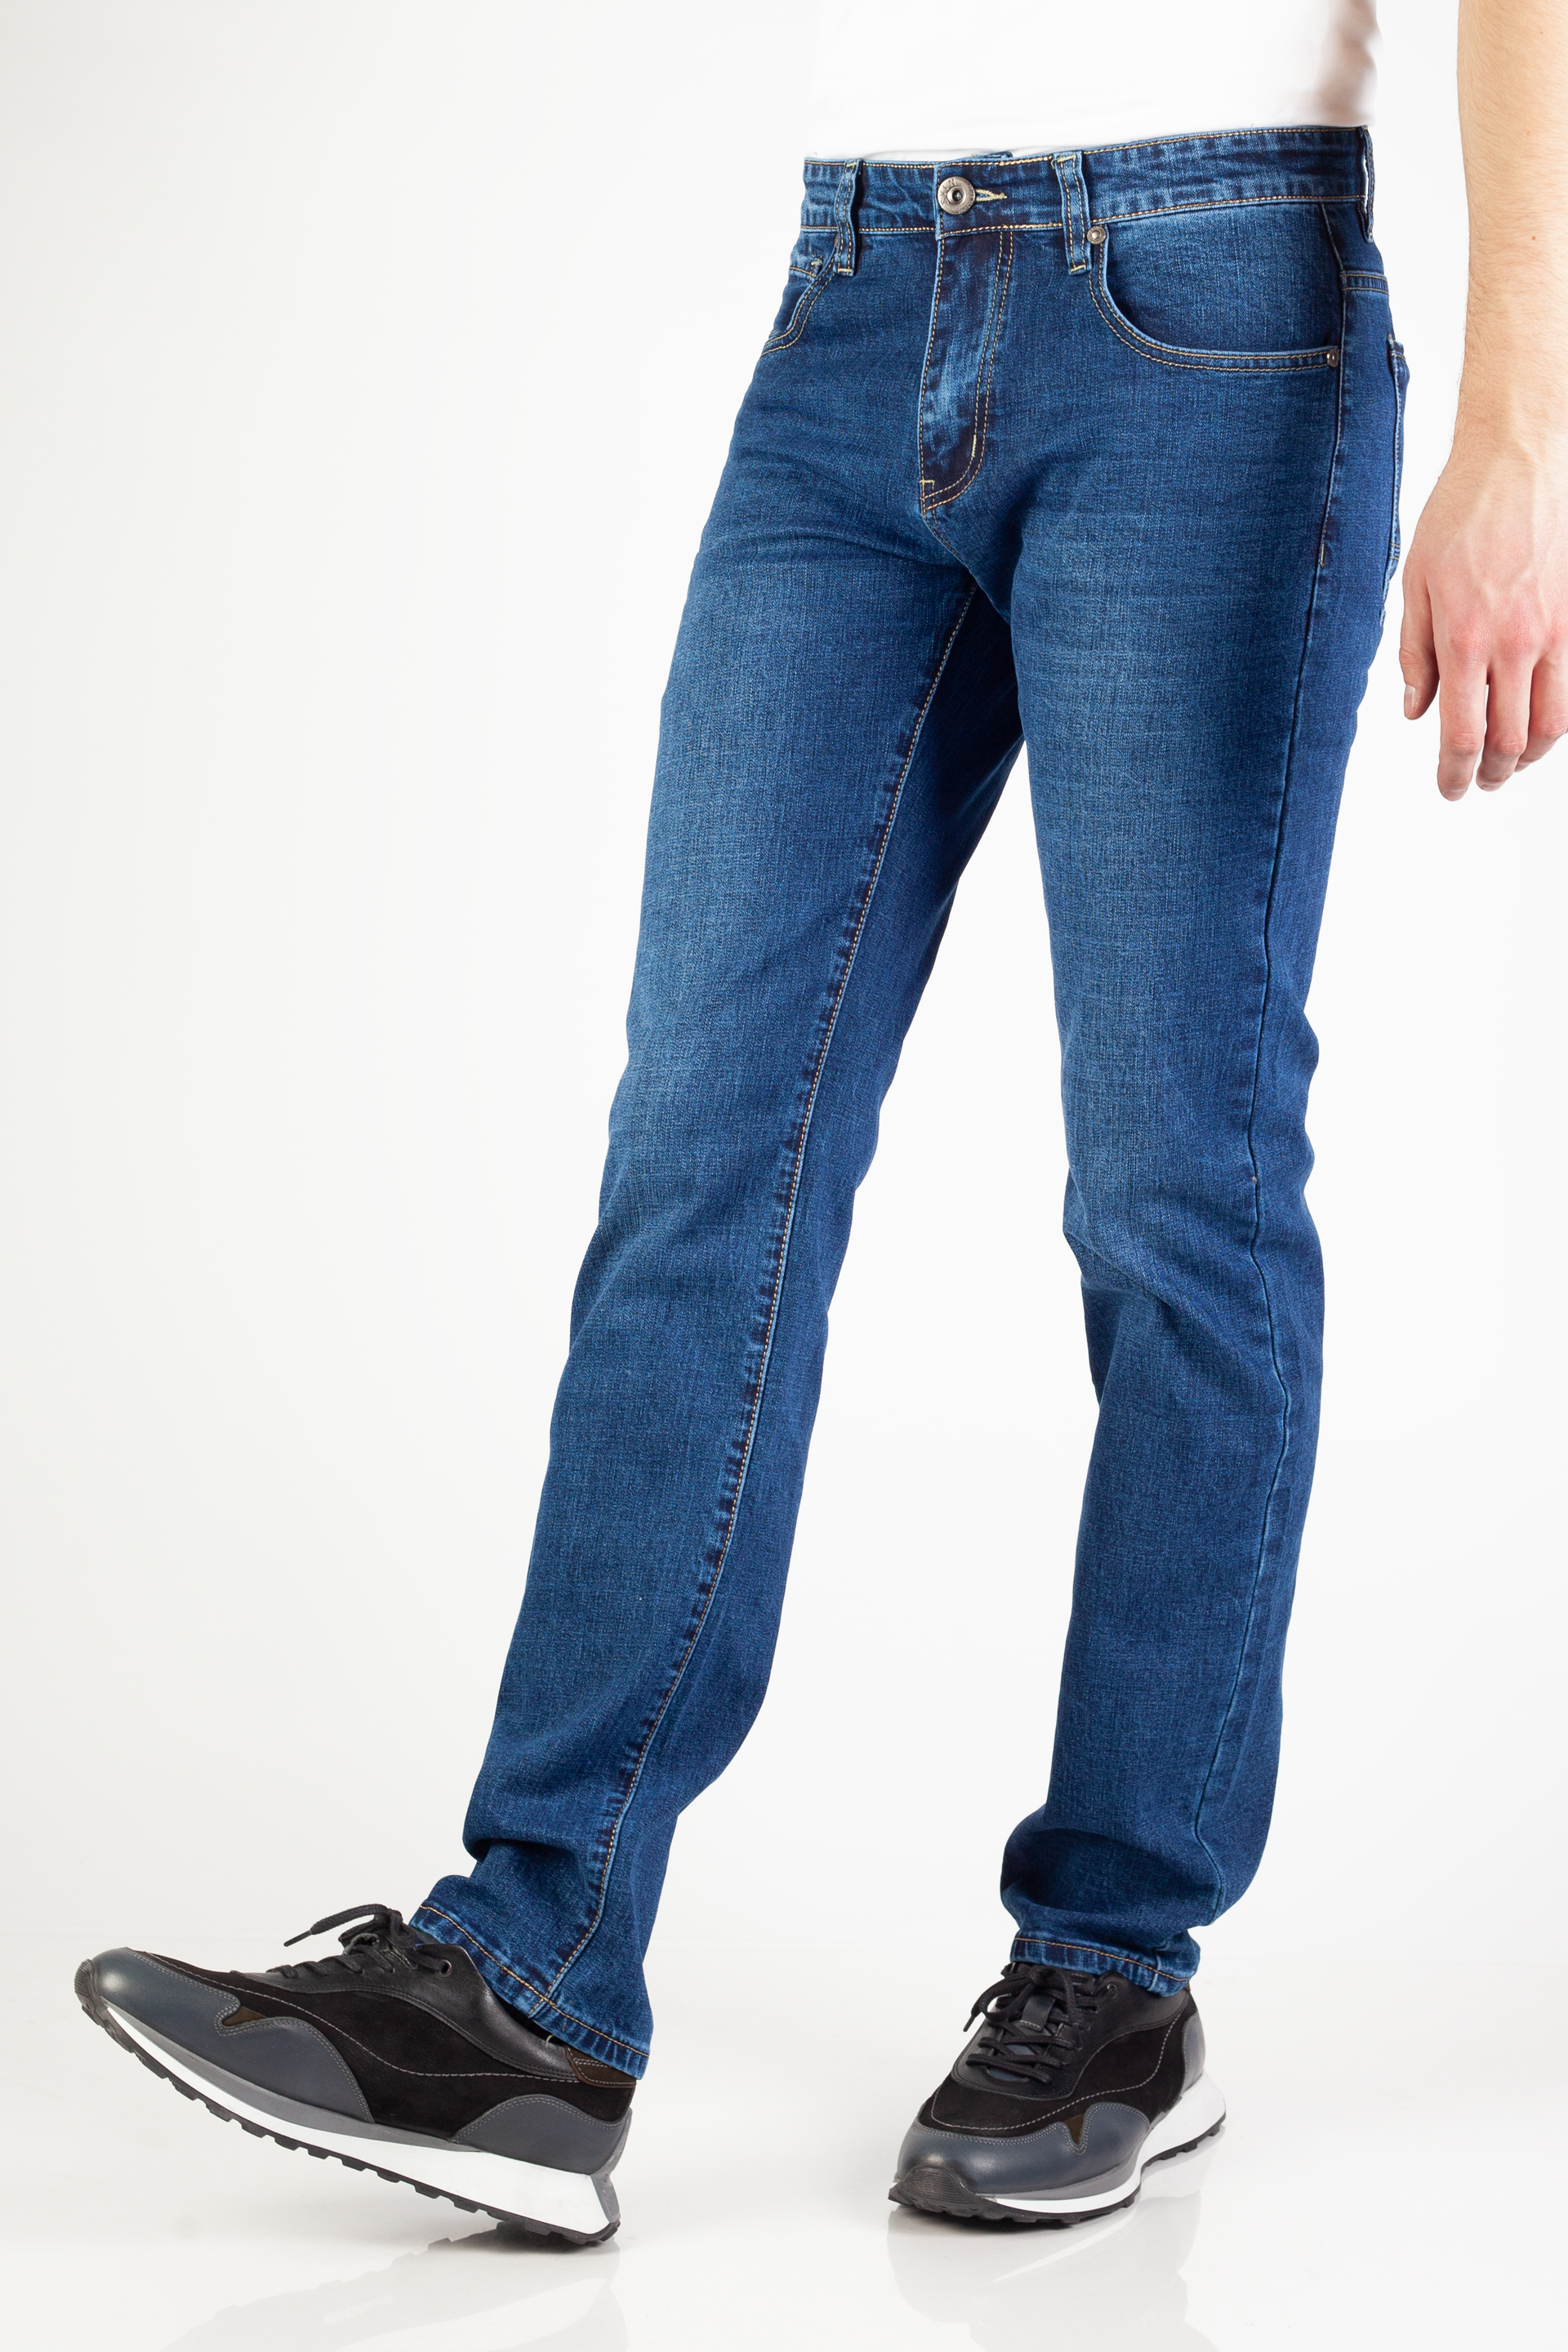 Jeans EVIN VG1912